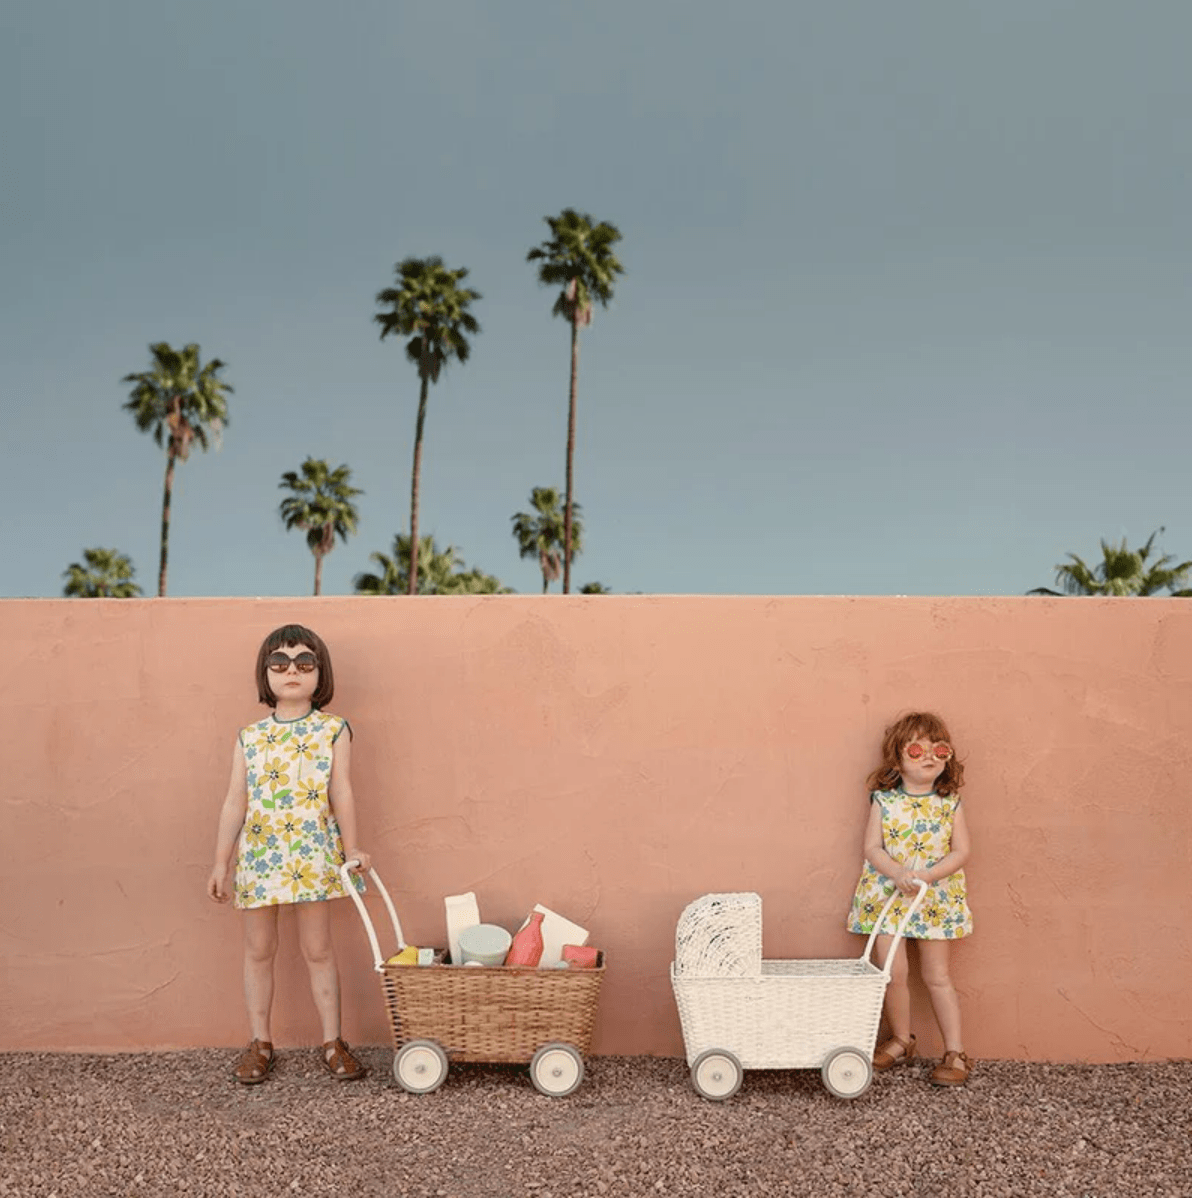 Olli Ella Rattan Convertible Rattan Strolley (Natural) by Olli Ella Natural Hand-Woven Rattan Basket on Wheels | Sustainable Rattan Toys | The Playful Peacock